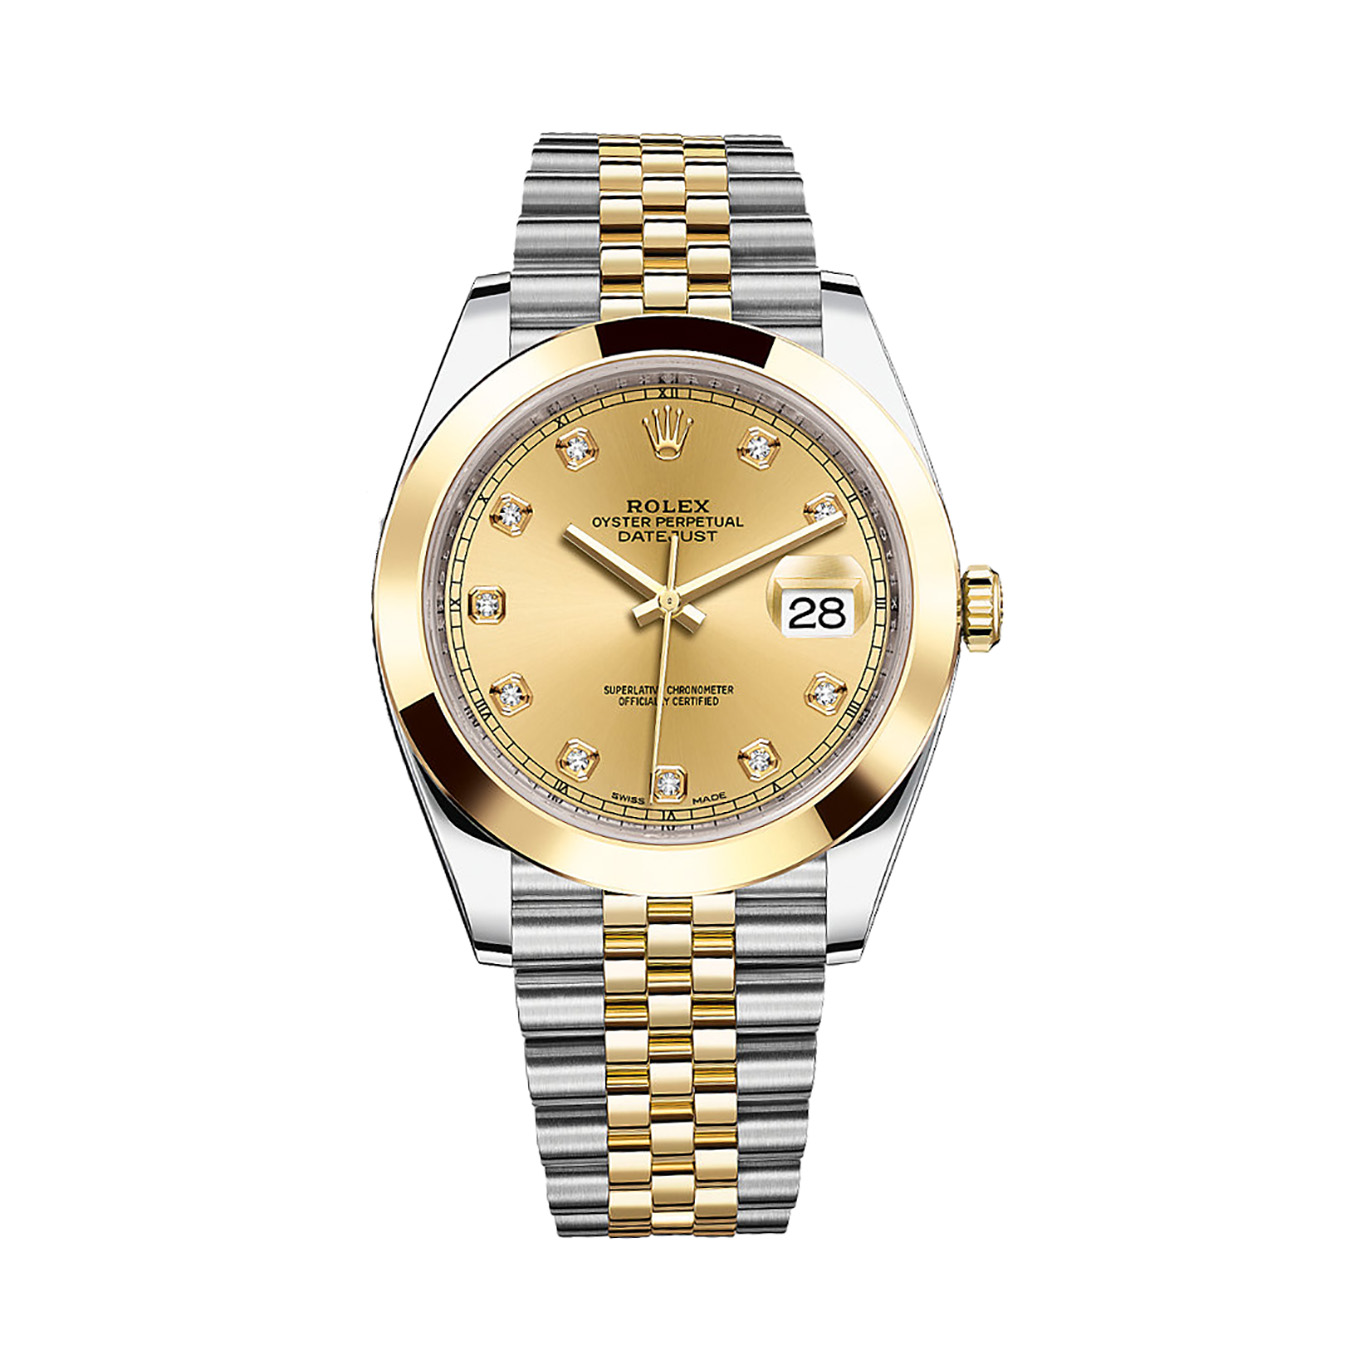 Datejust 41 126303 Gold & Stainless Steel Watch (Champagne Set With Diamonds)